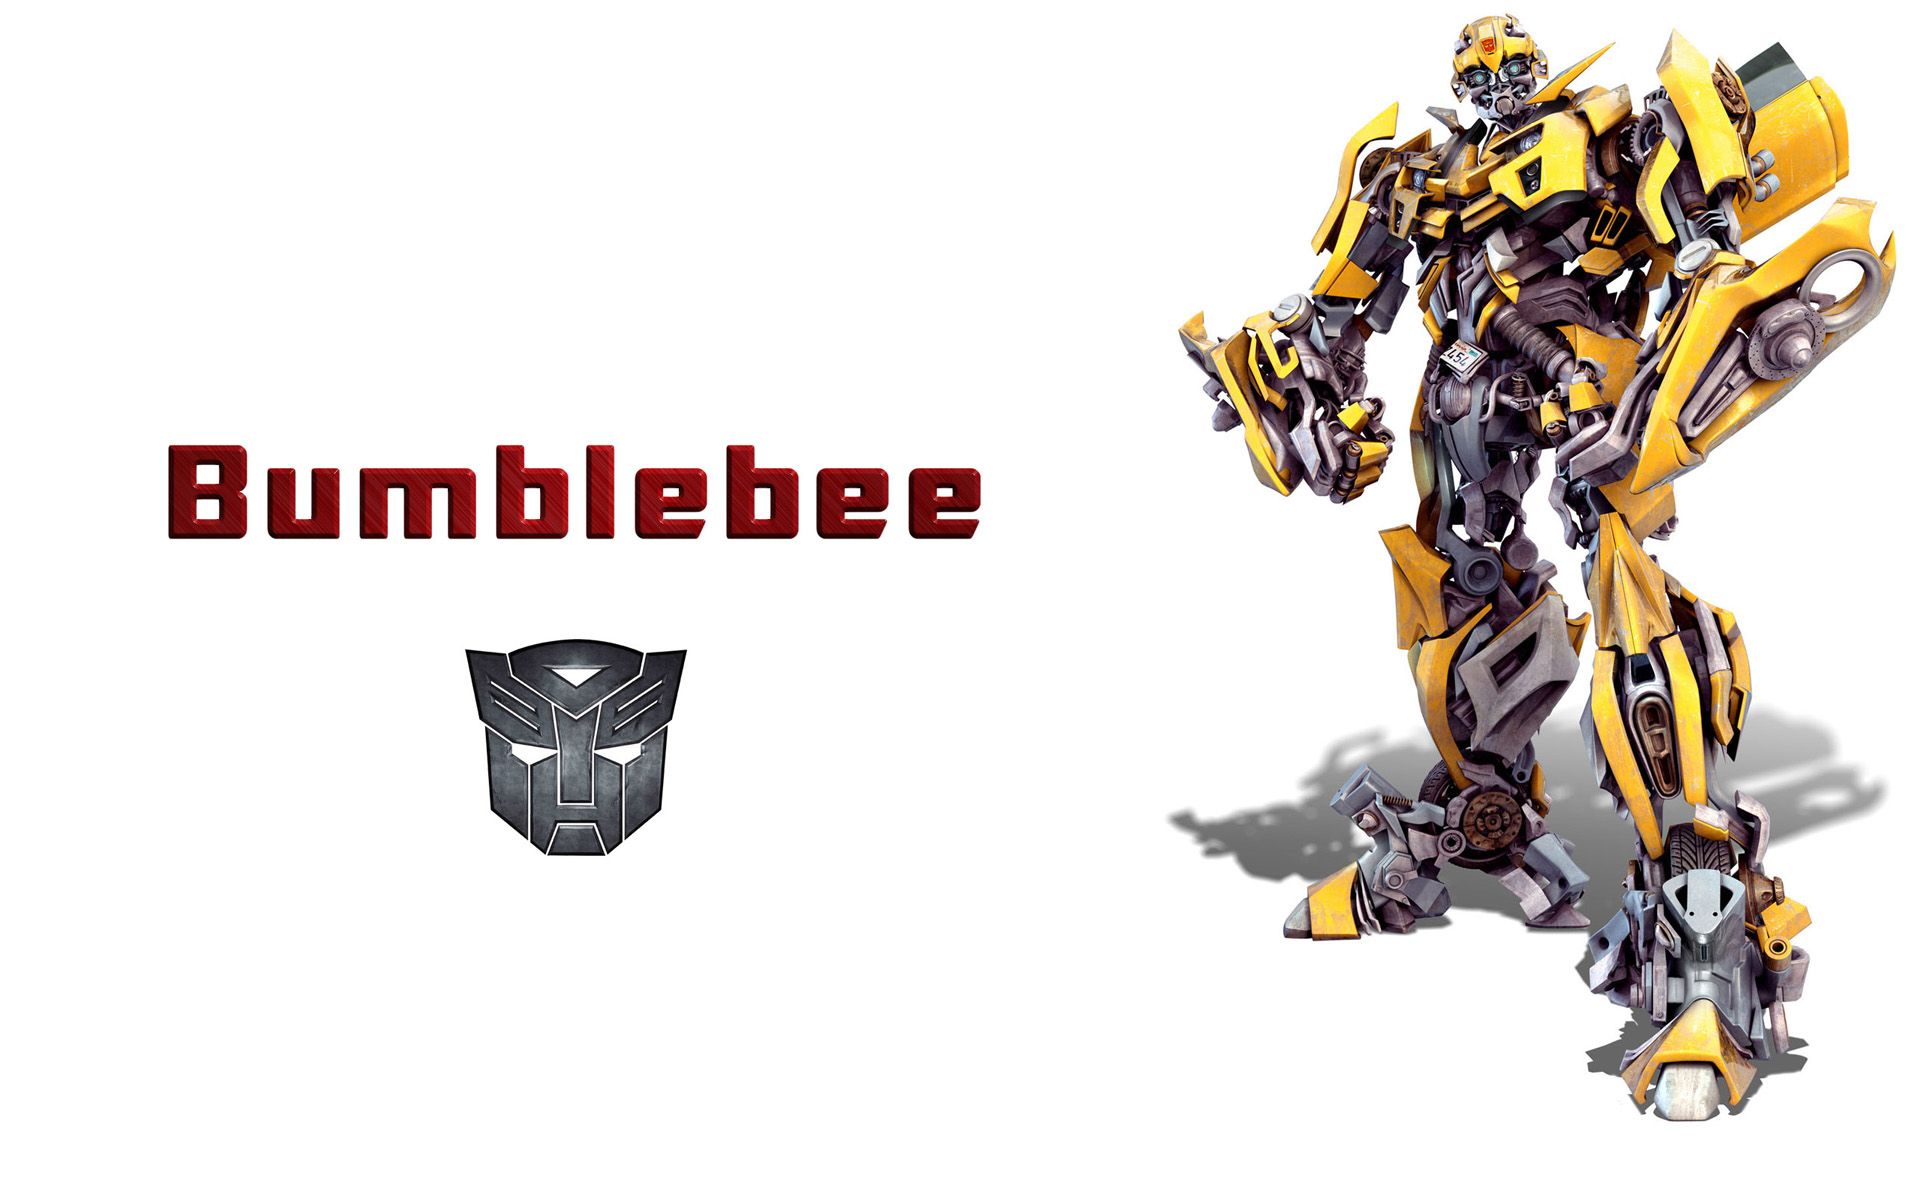 Store, bumblebee, wallpaper, policies, transformers, movies (#142228)